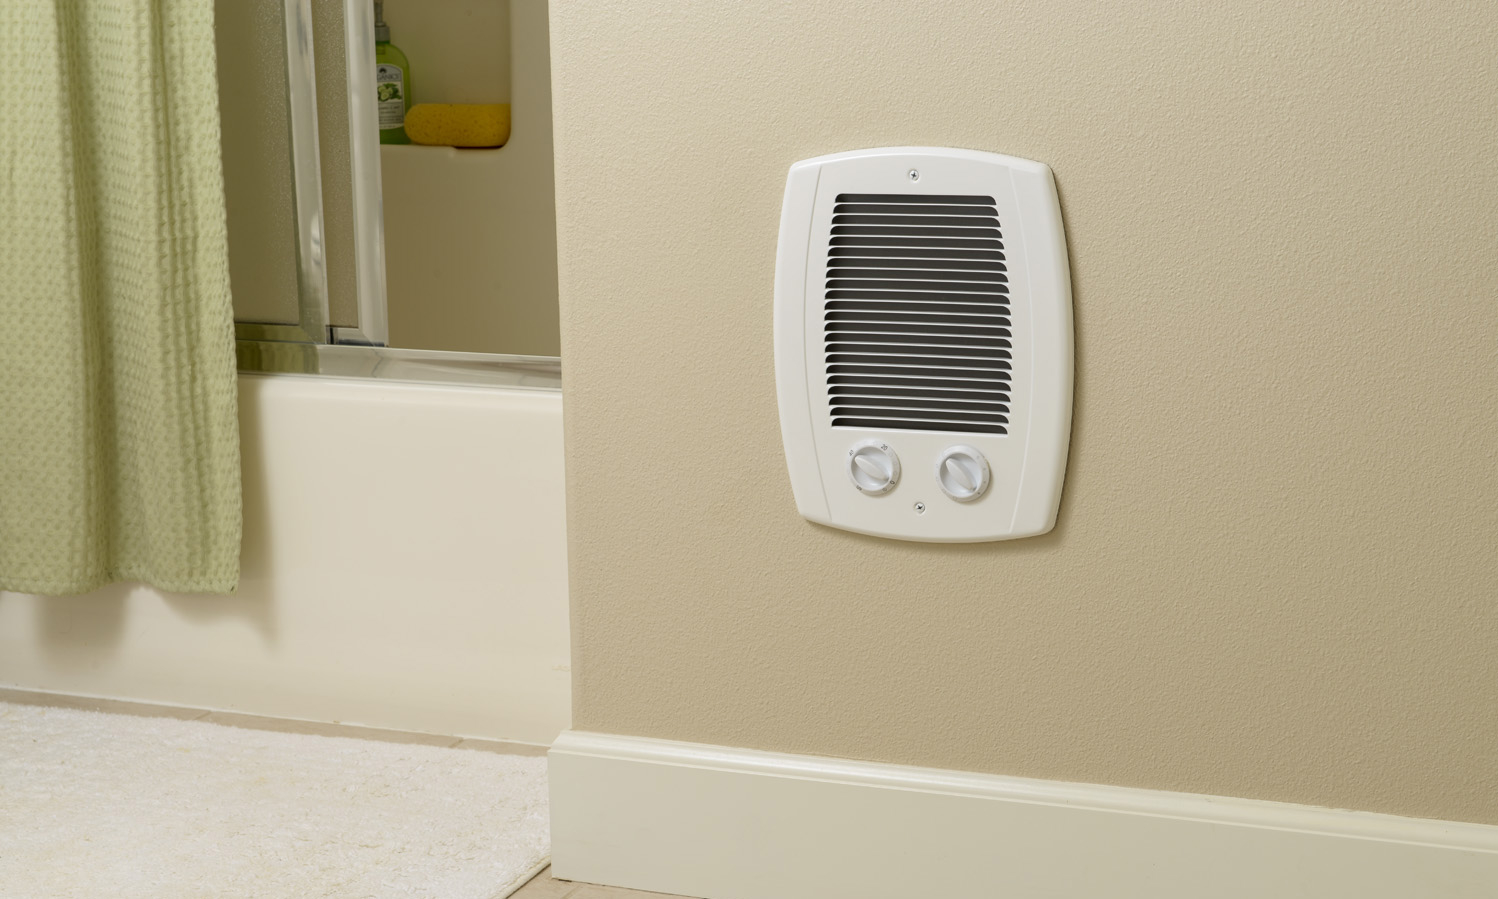 Top 6 Best Bathroom Heaters 2020 Reviews Buying Guide within measurements 1498 X 899